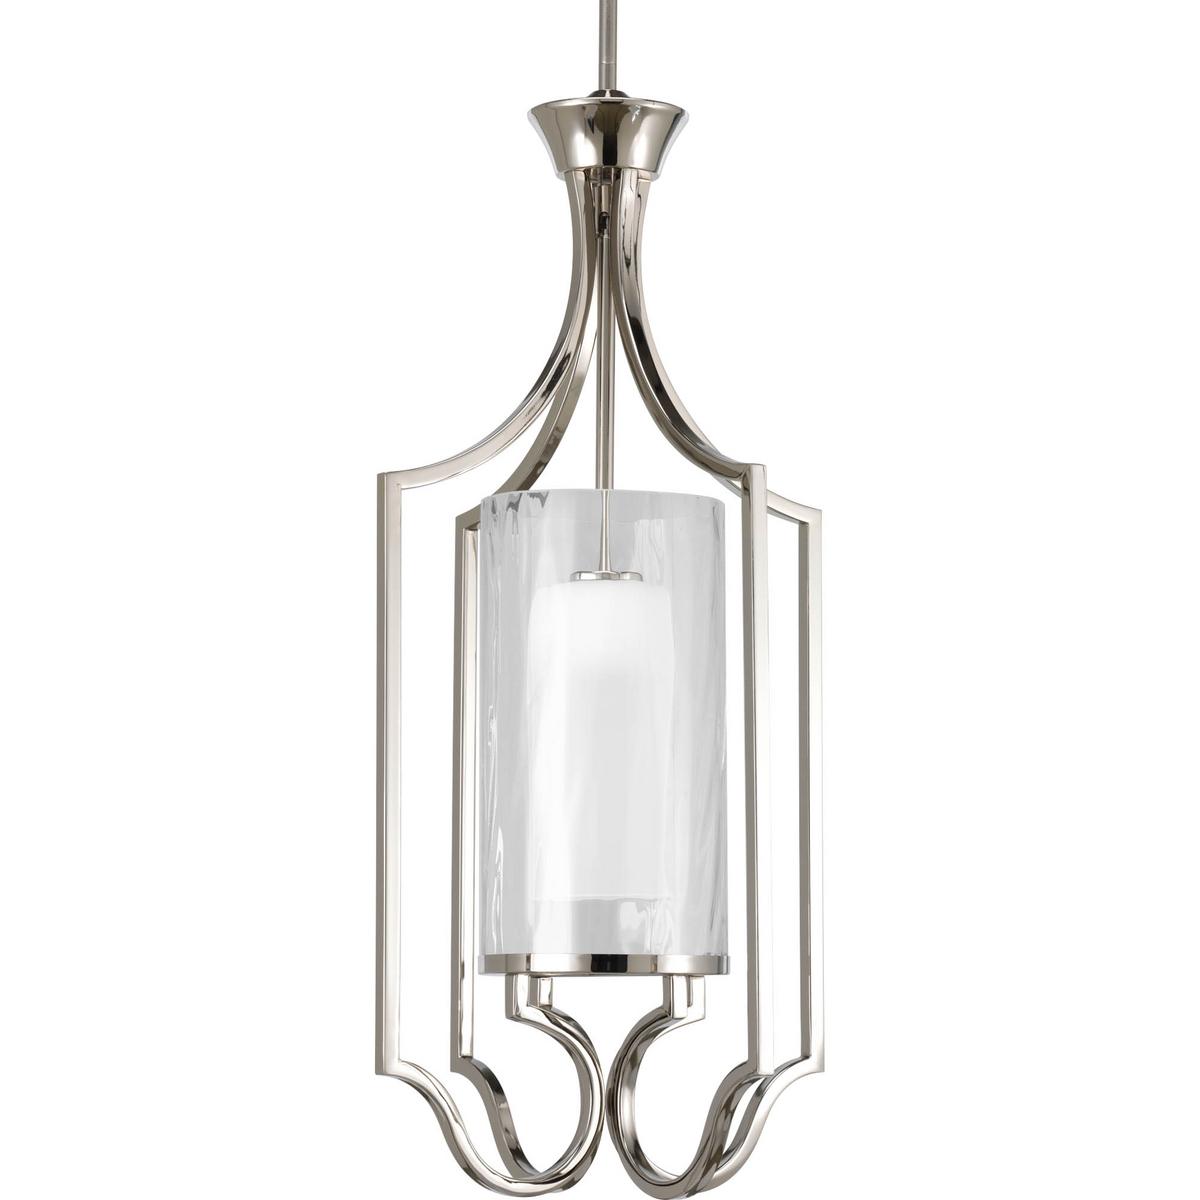 Hubbell P3946-104 One-light small foyer pendant. Caress features a chic, sophisticated one-light chandelier featuring a Polished Nickel metal frame with layered glass diffusers to cast a glimmering light. An outer shade of clear, water glass adds rich texture and playful r